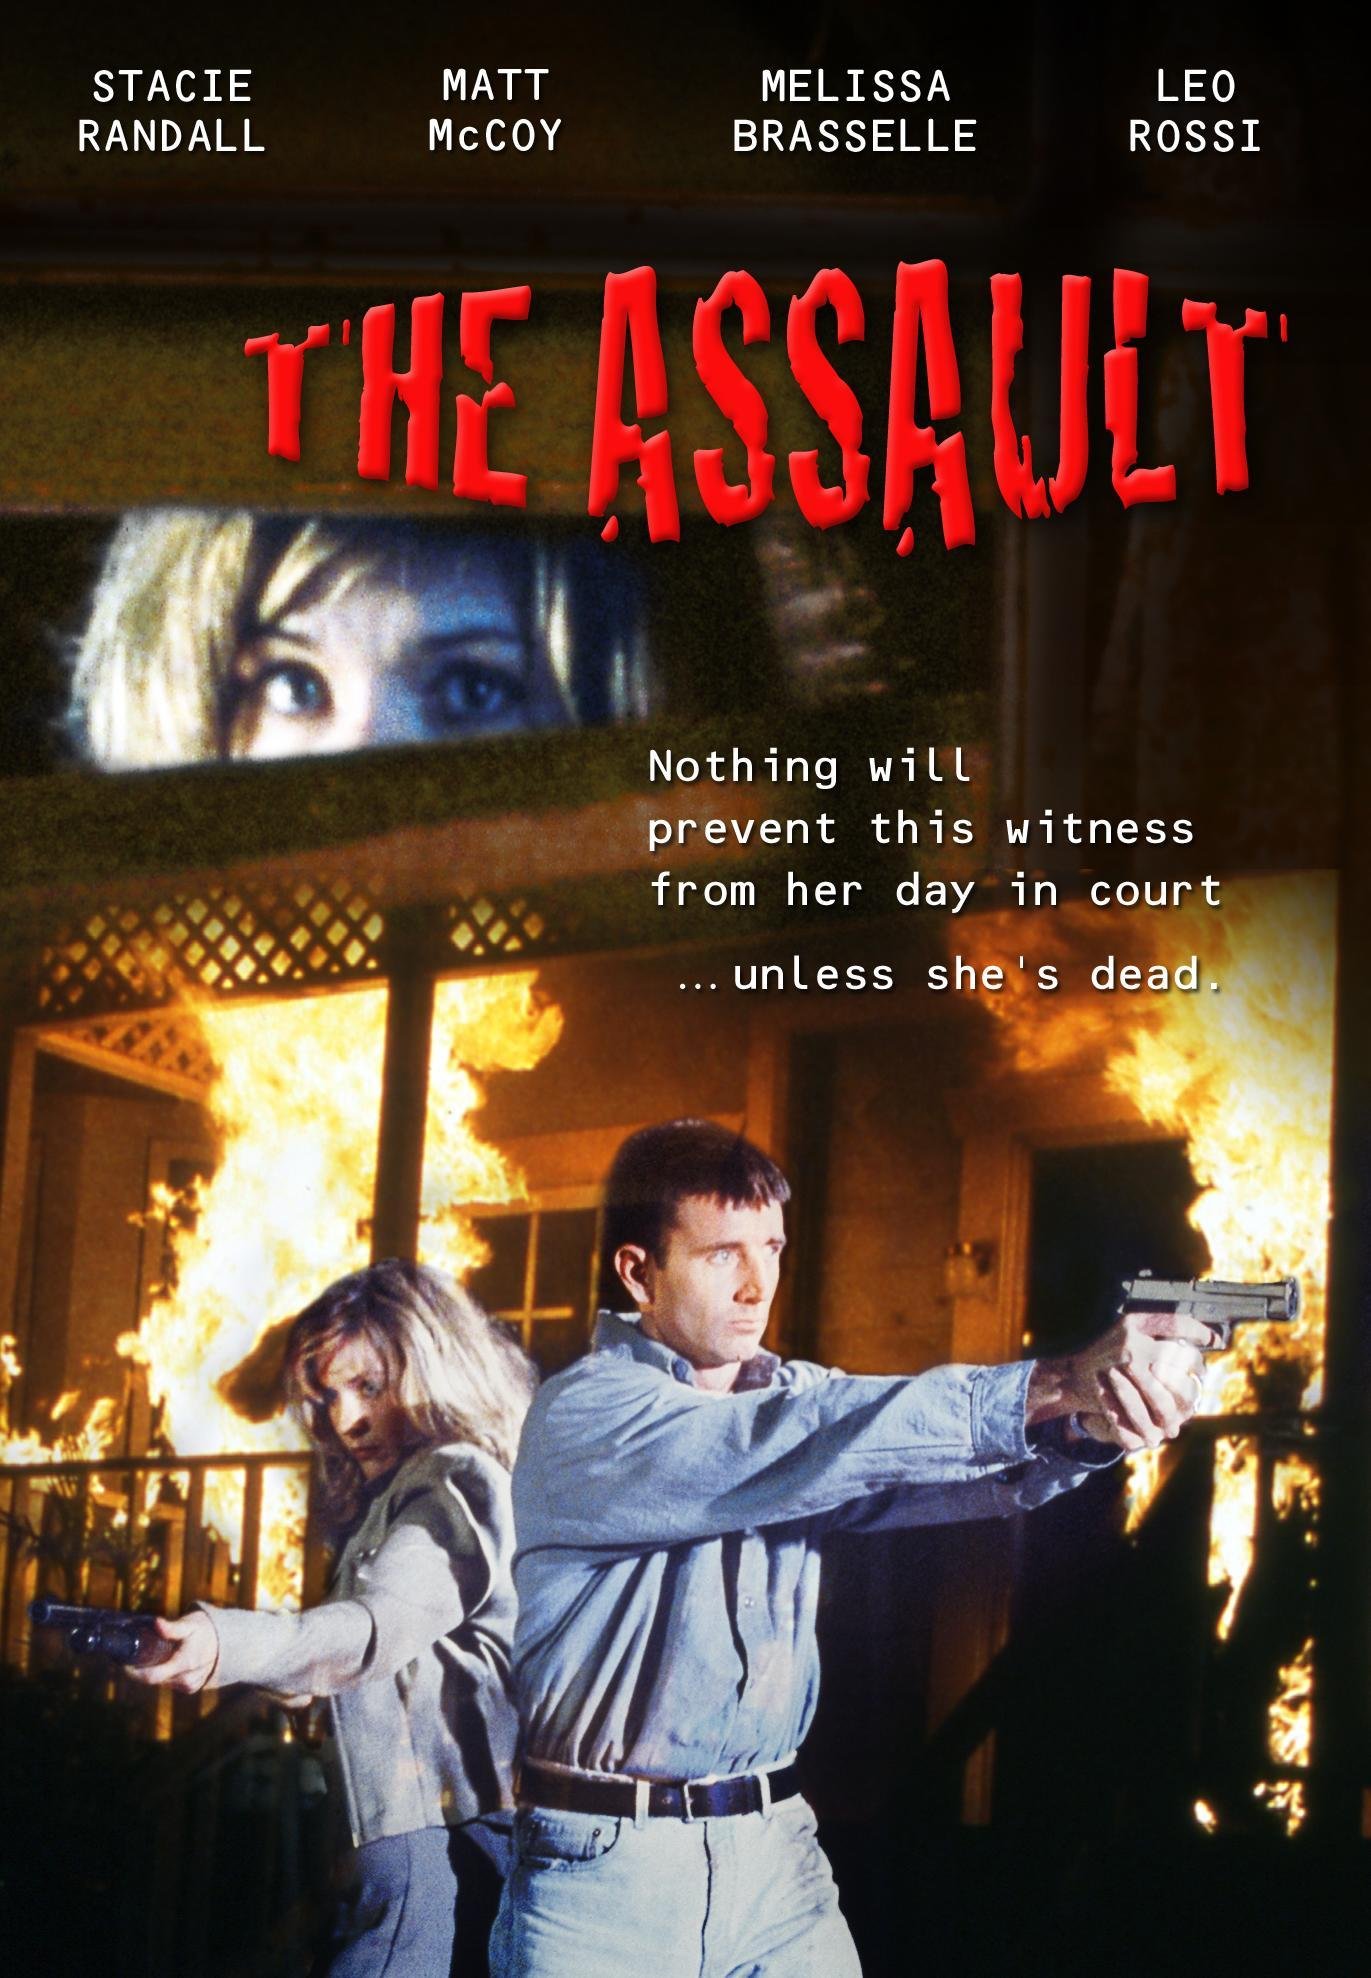 The Assault (1996) starring Stacie Randall on DVD on DVD